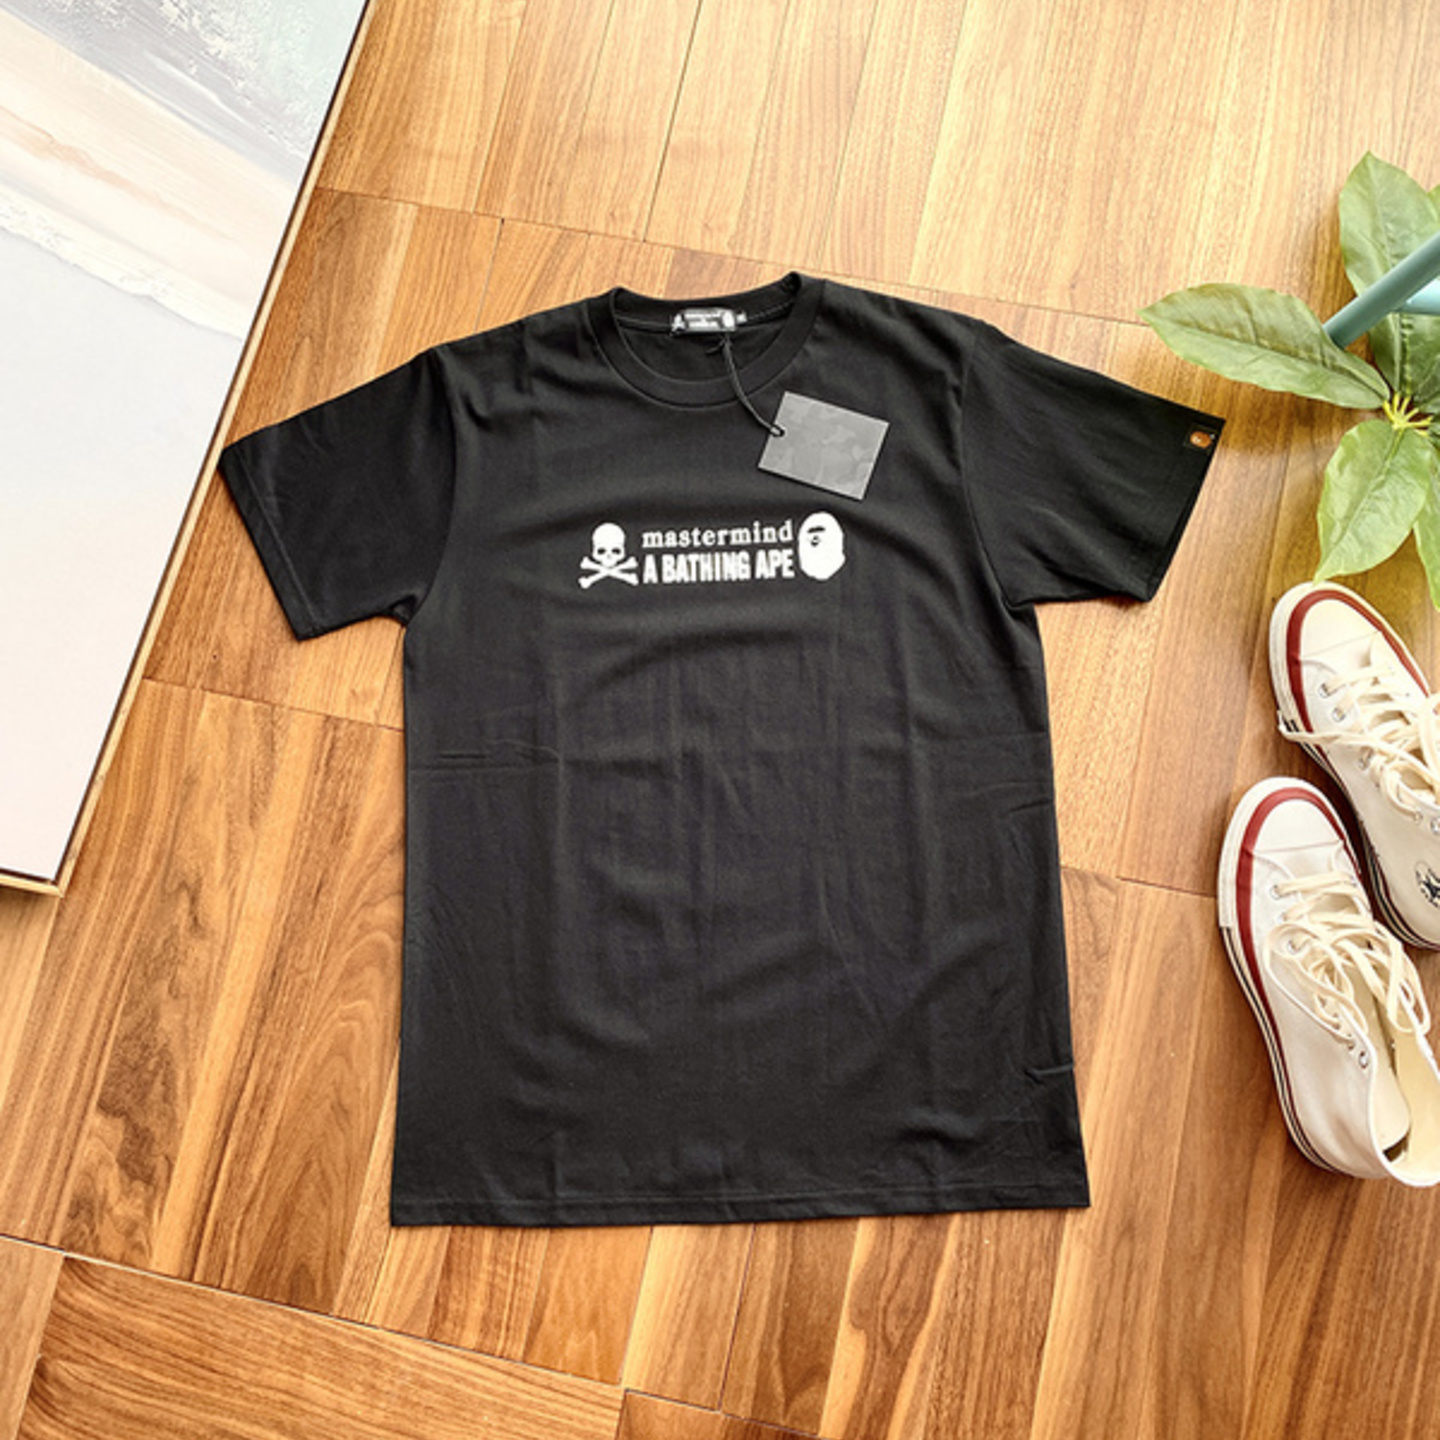 Mastermind &A Bathing Ape Towel embroidery T Shirt 